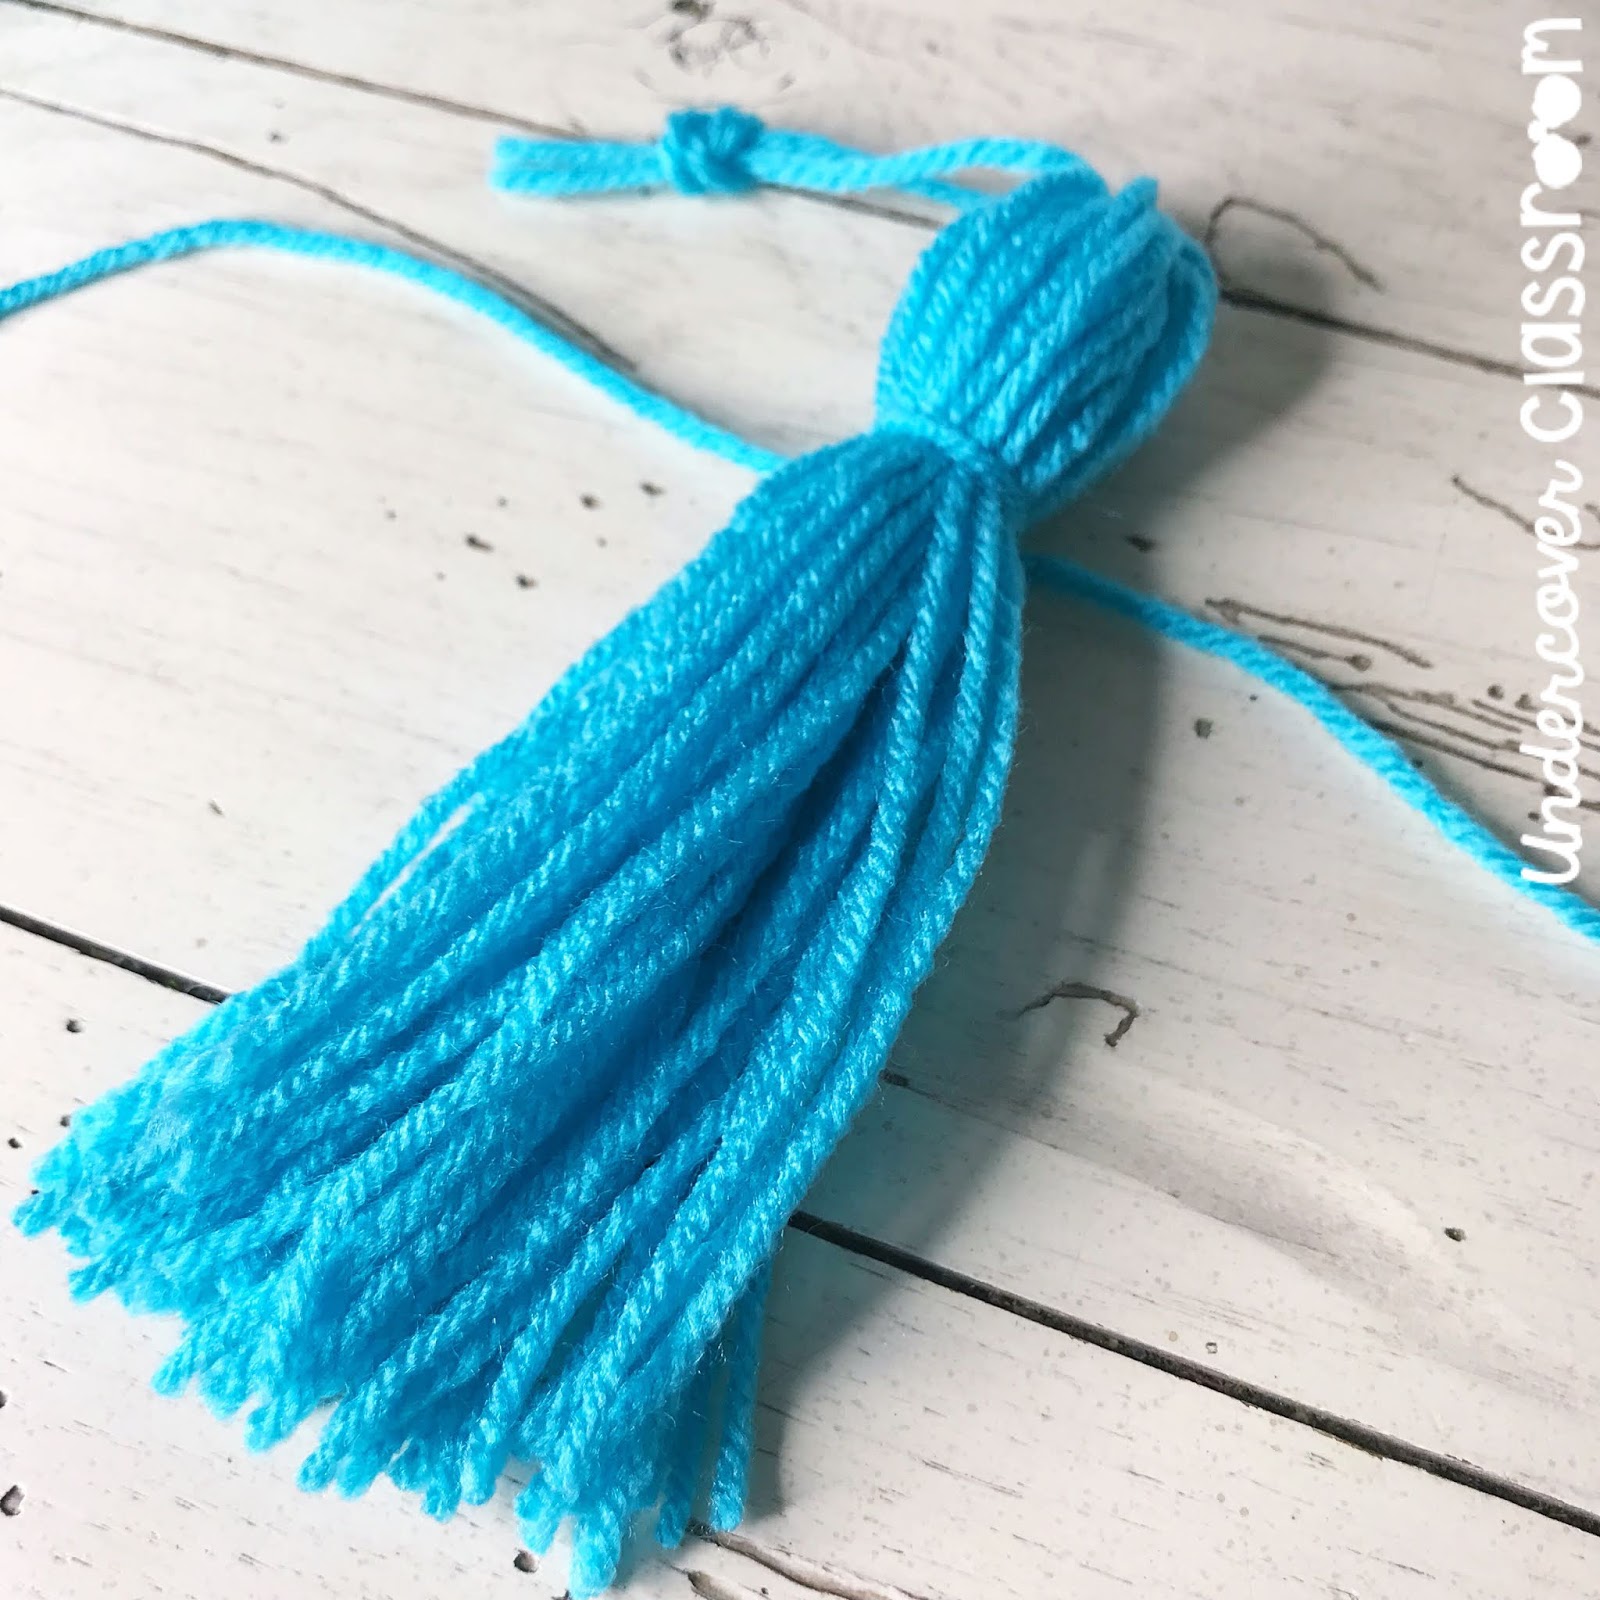 Make your own tassel garland from yarn. Here's how!